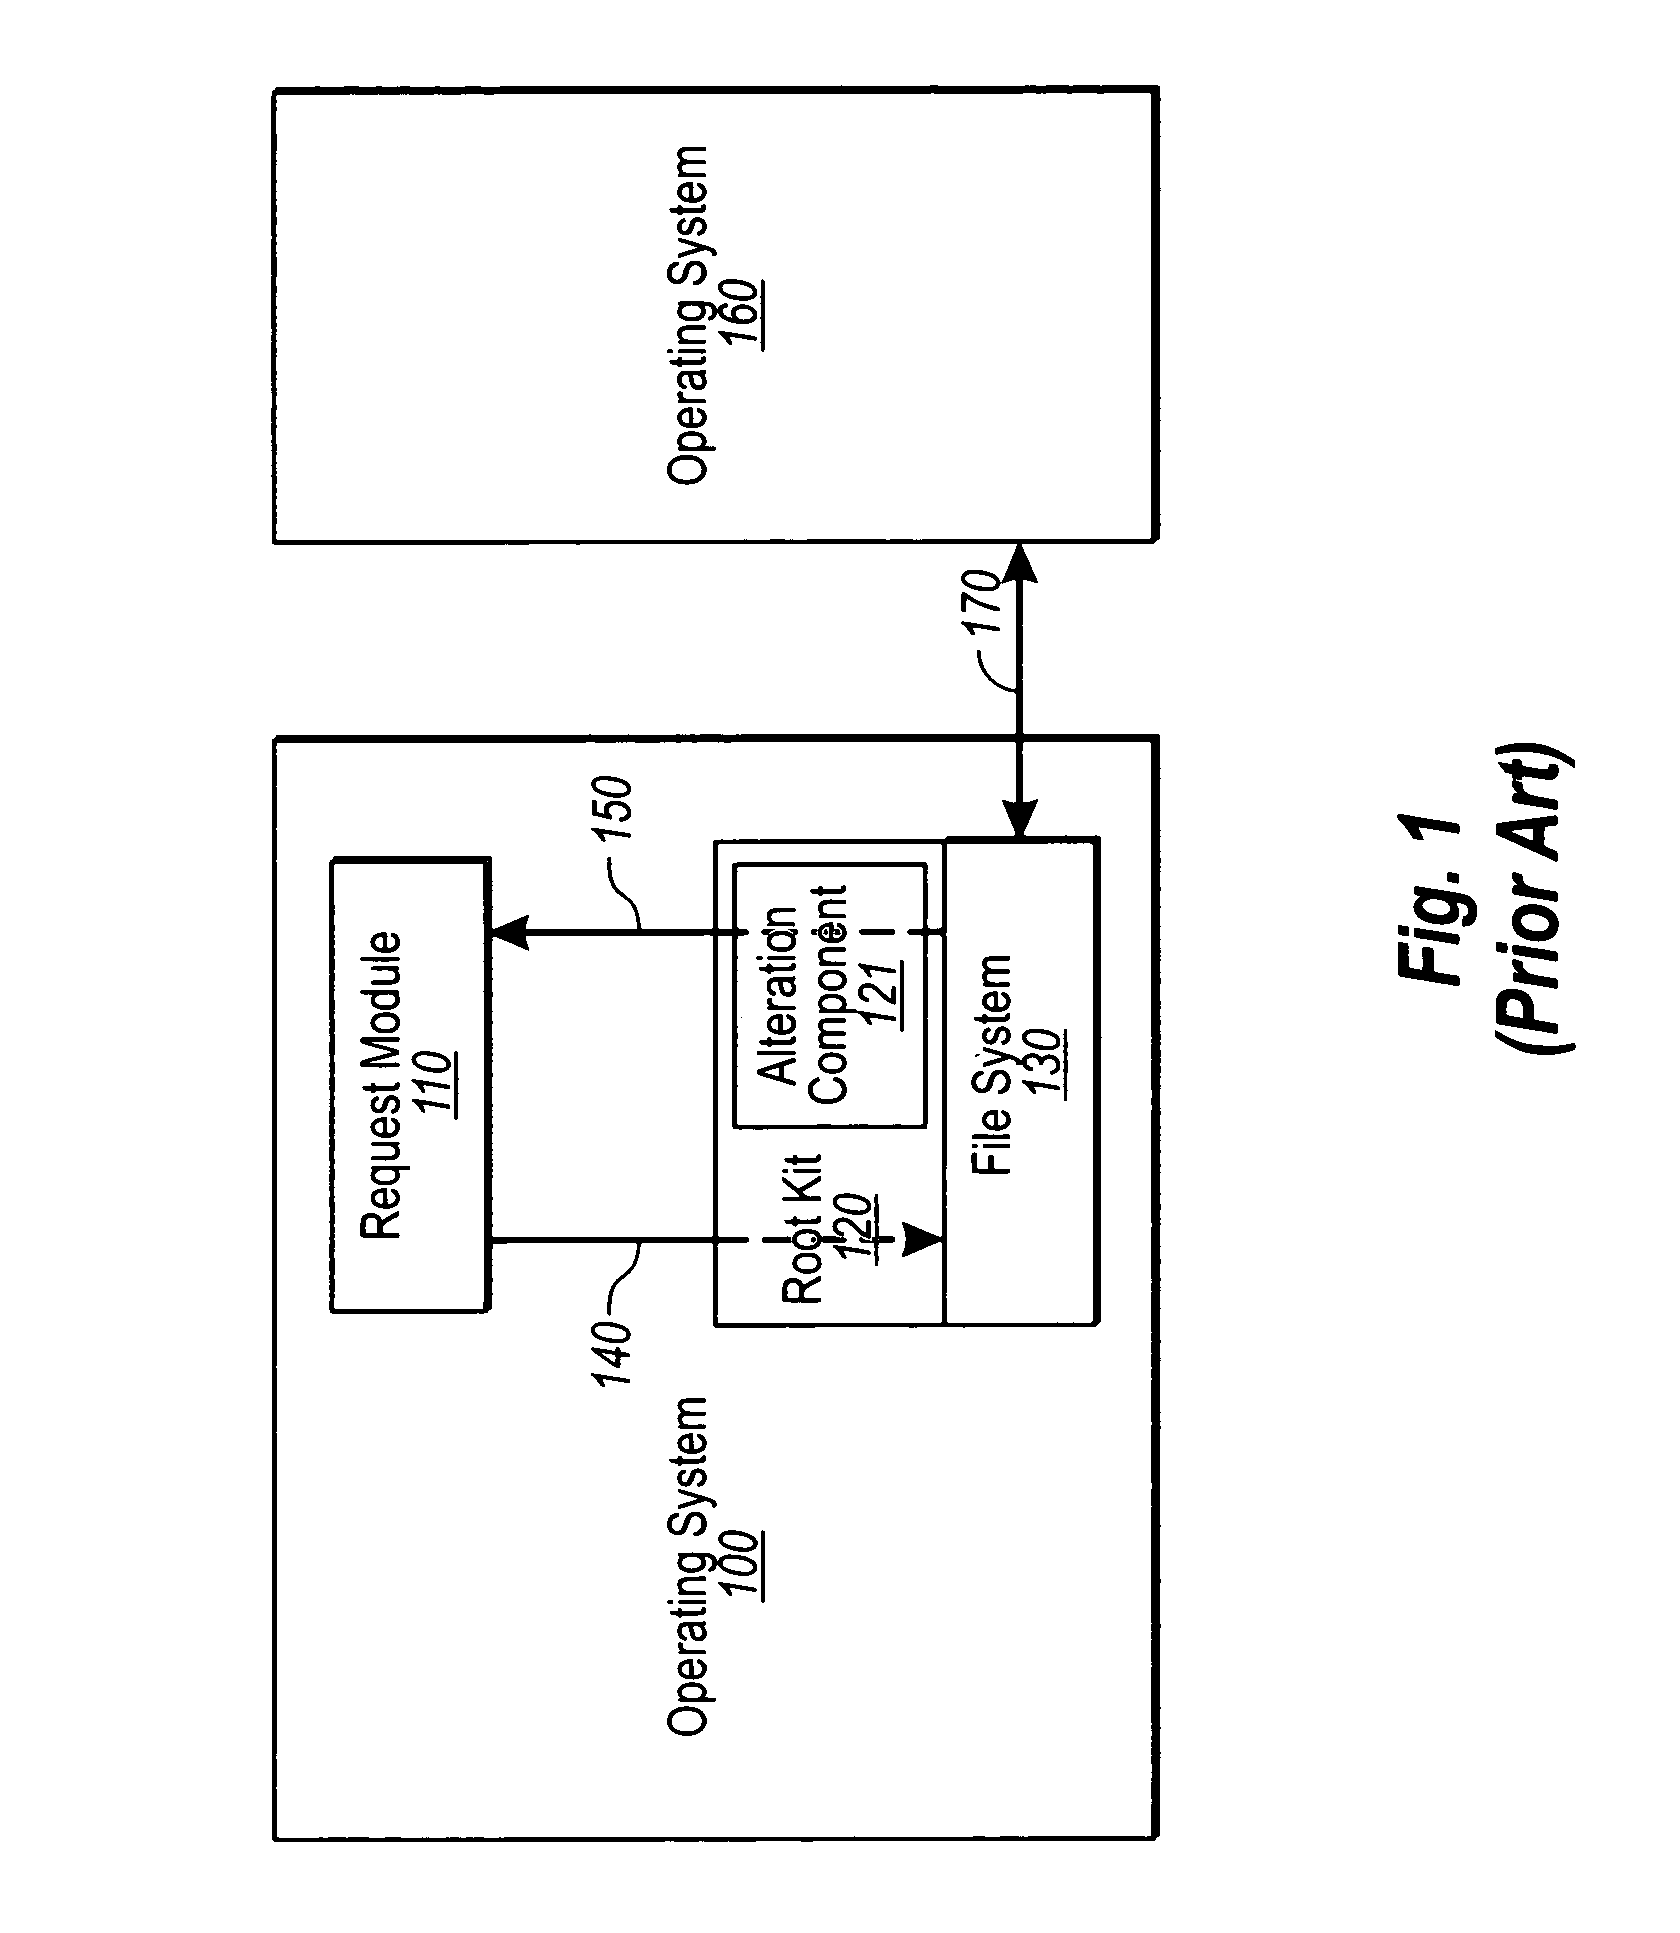 Detecting and removing rootkits from within an infected computing system